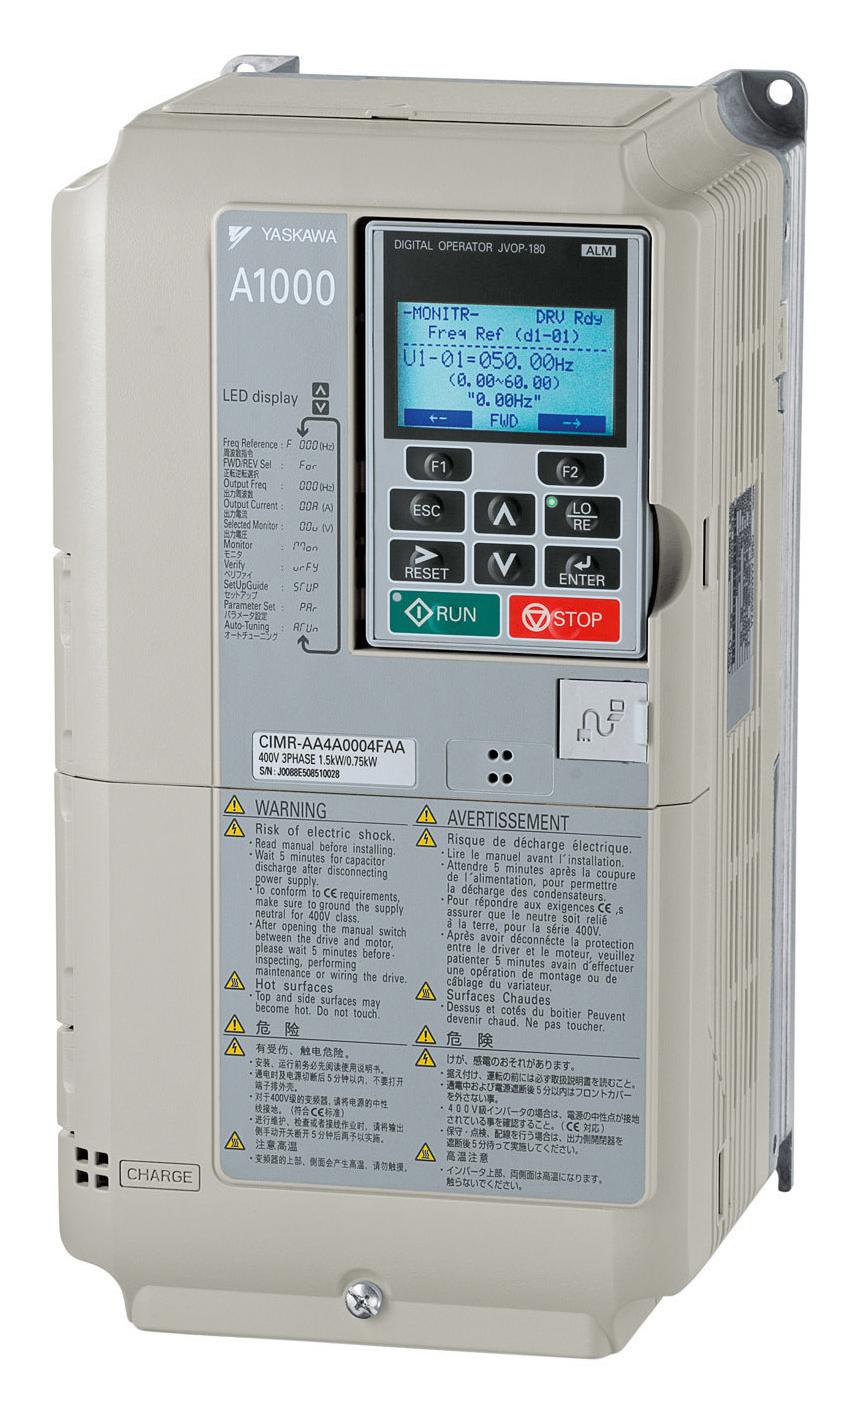 CIMR-AC4A0362AAA AC MOTOR SPEED CONTROLLERS OMRON